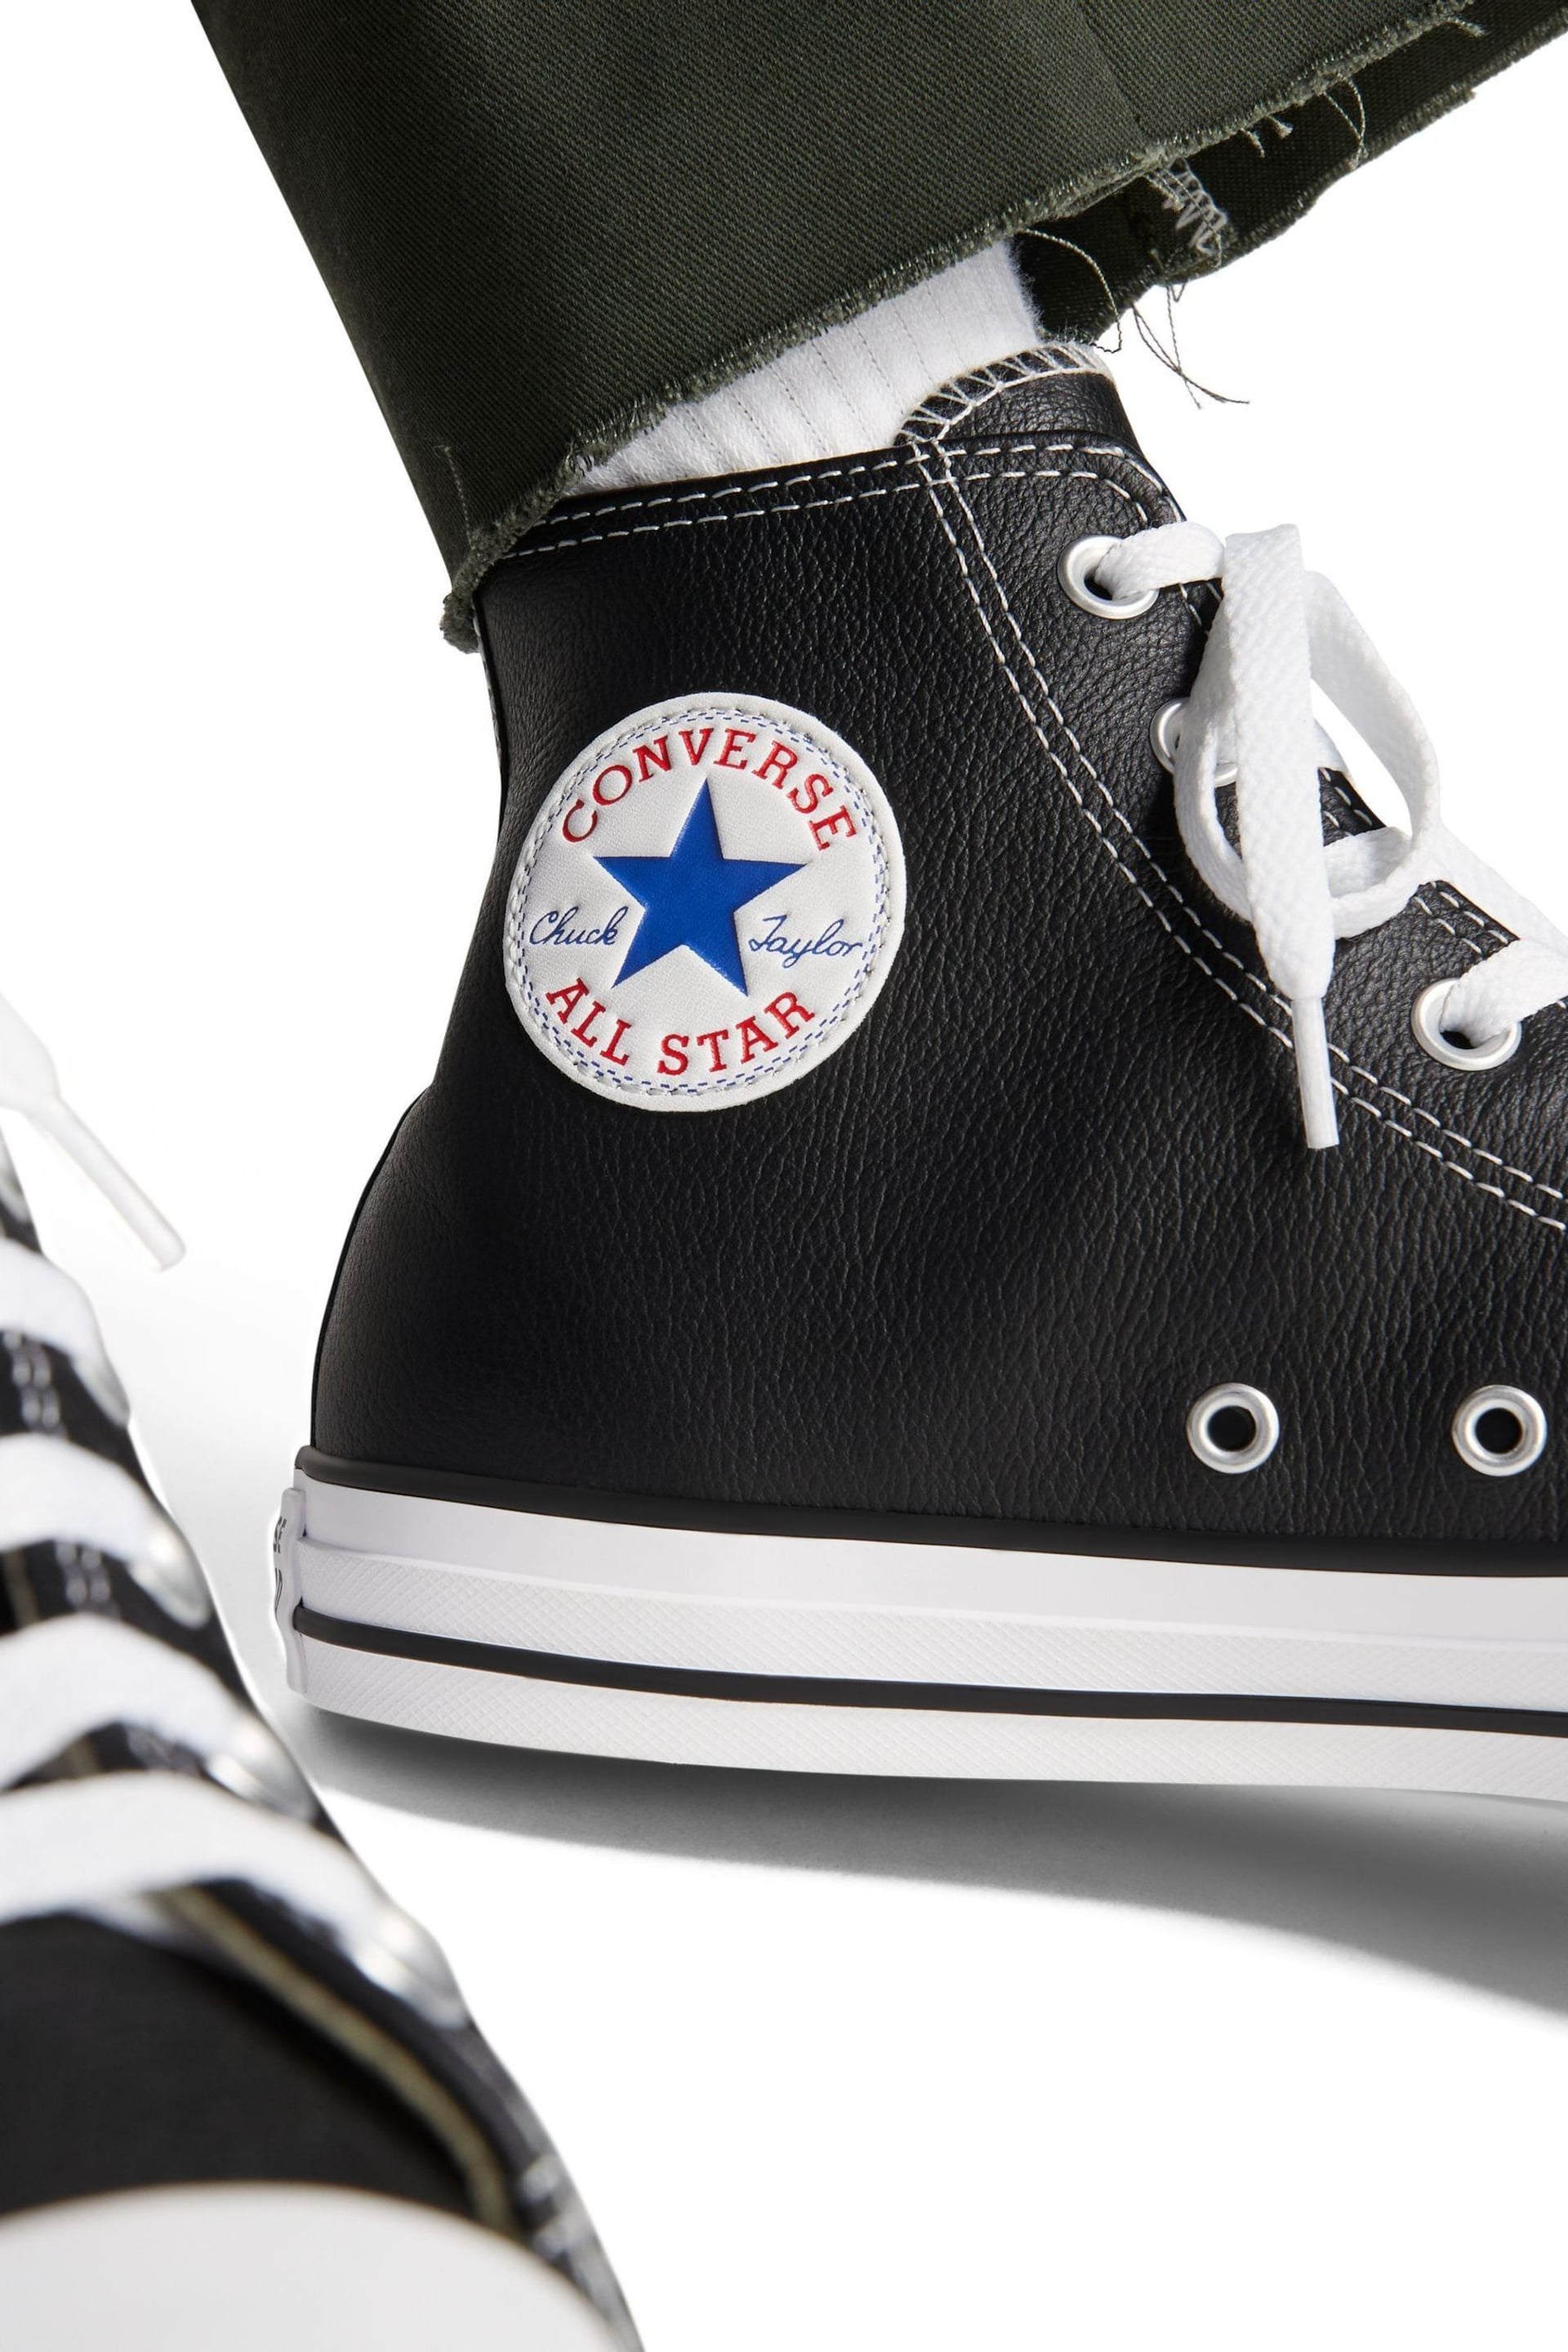 Converse Black Leather Chuck Taylor All Star High Top Trainers - Image 2 of 11